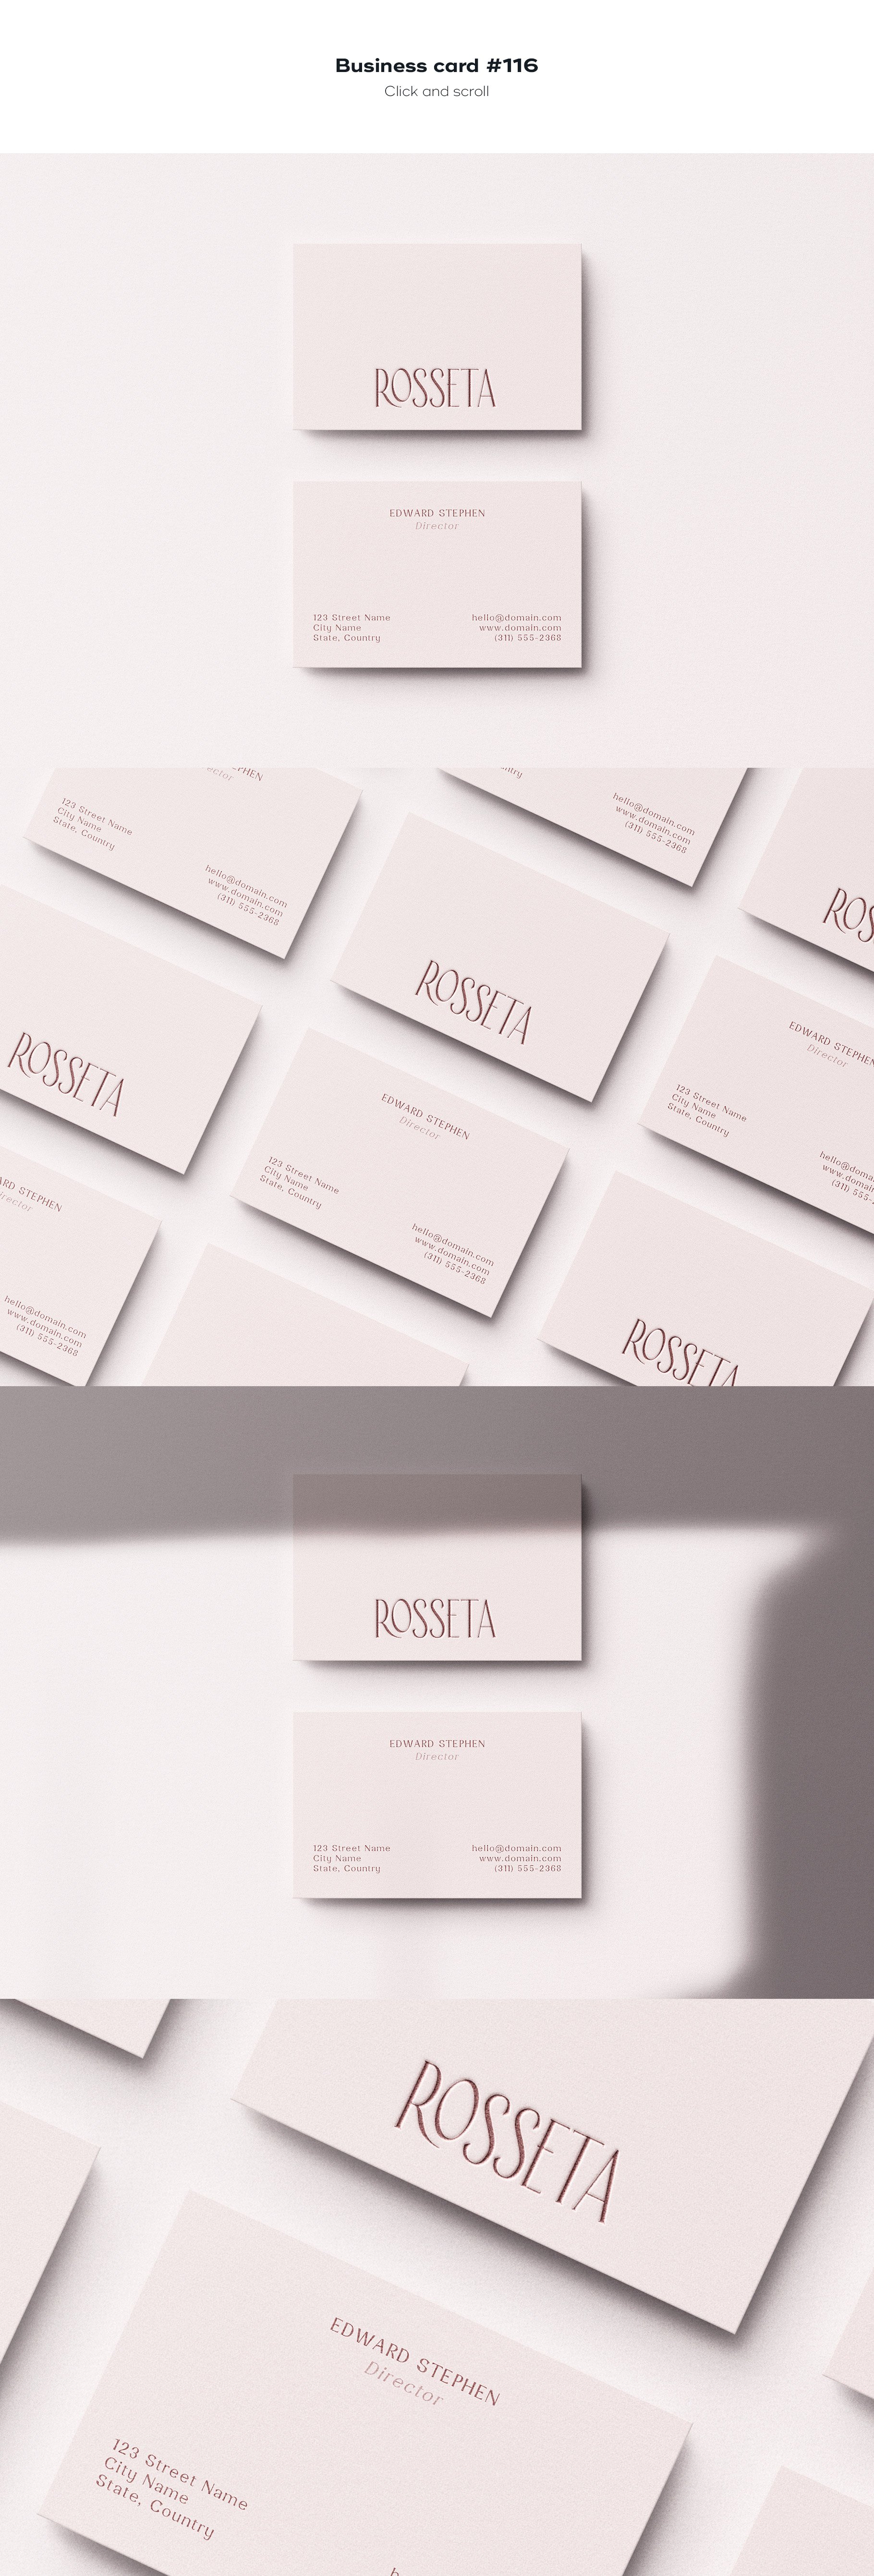 business card 116 303